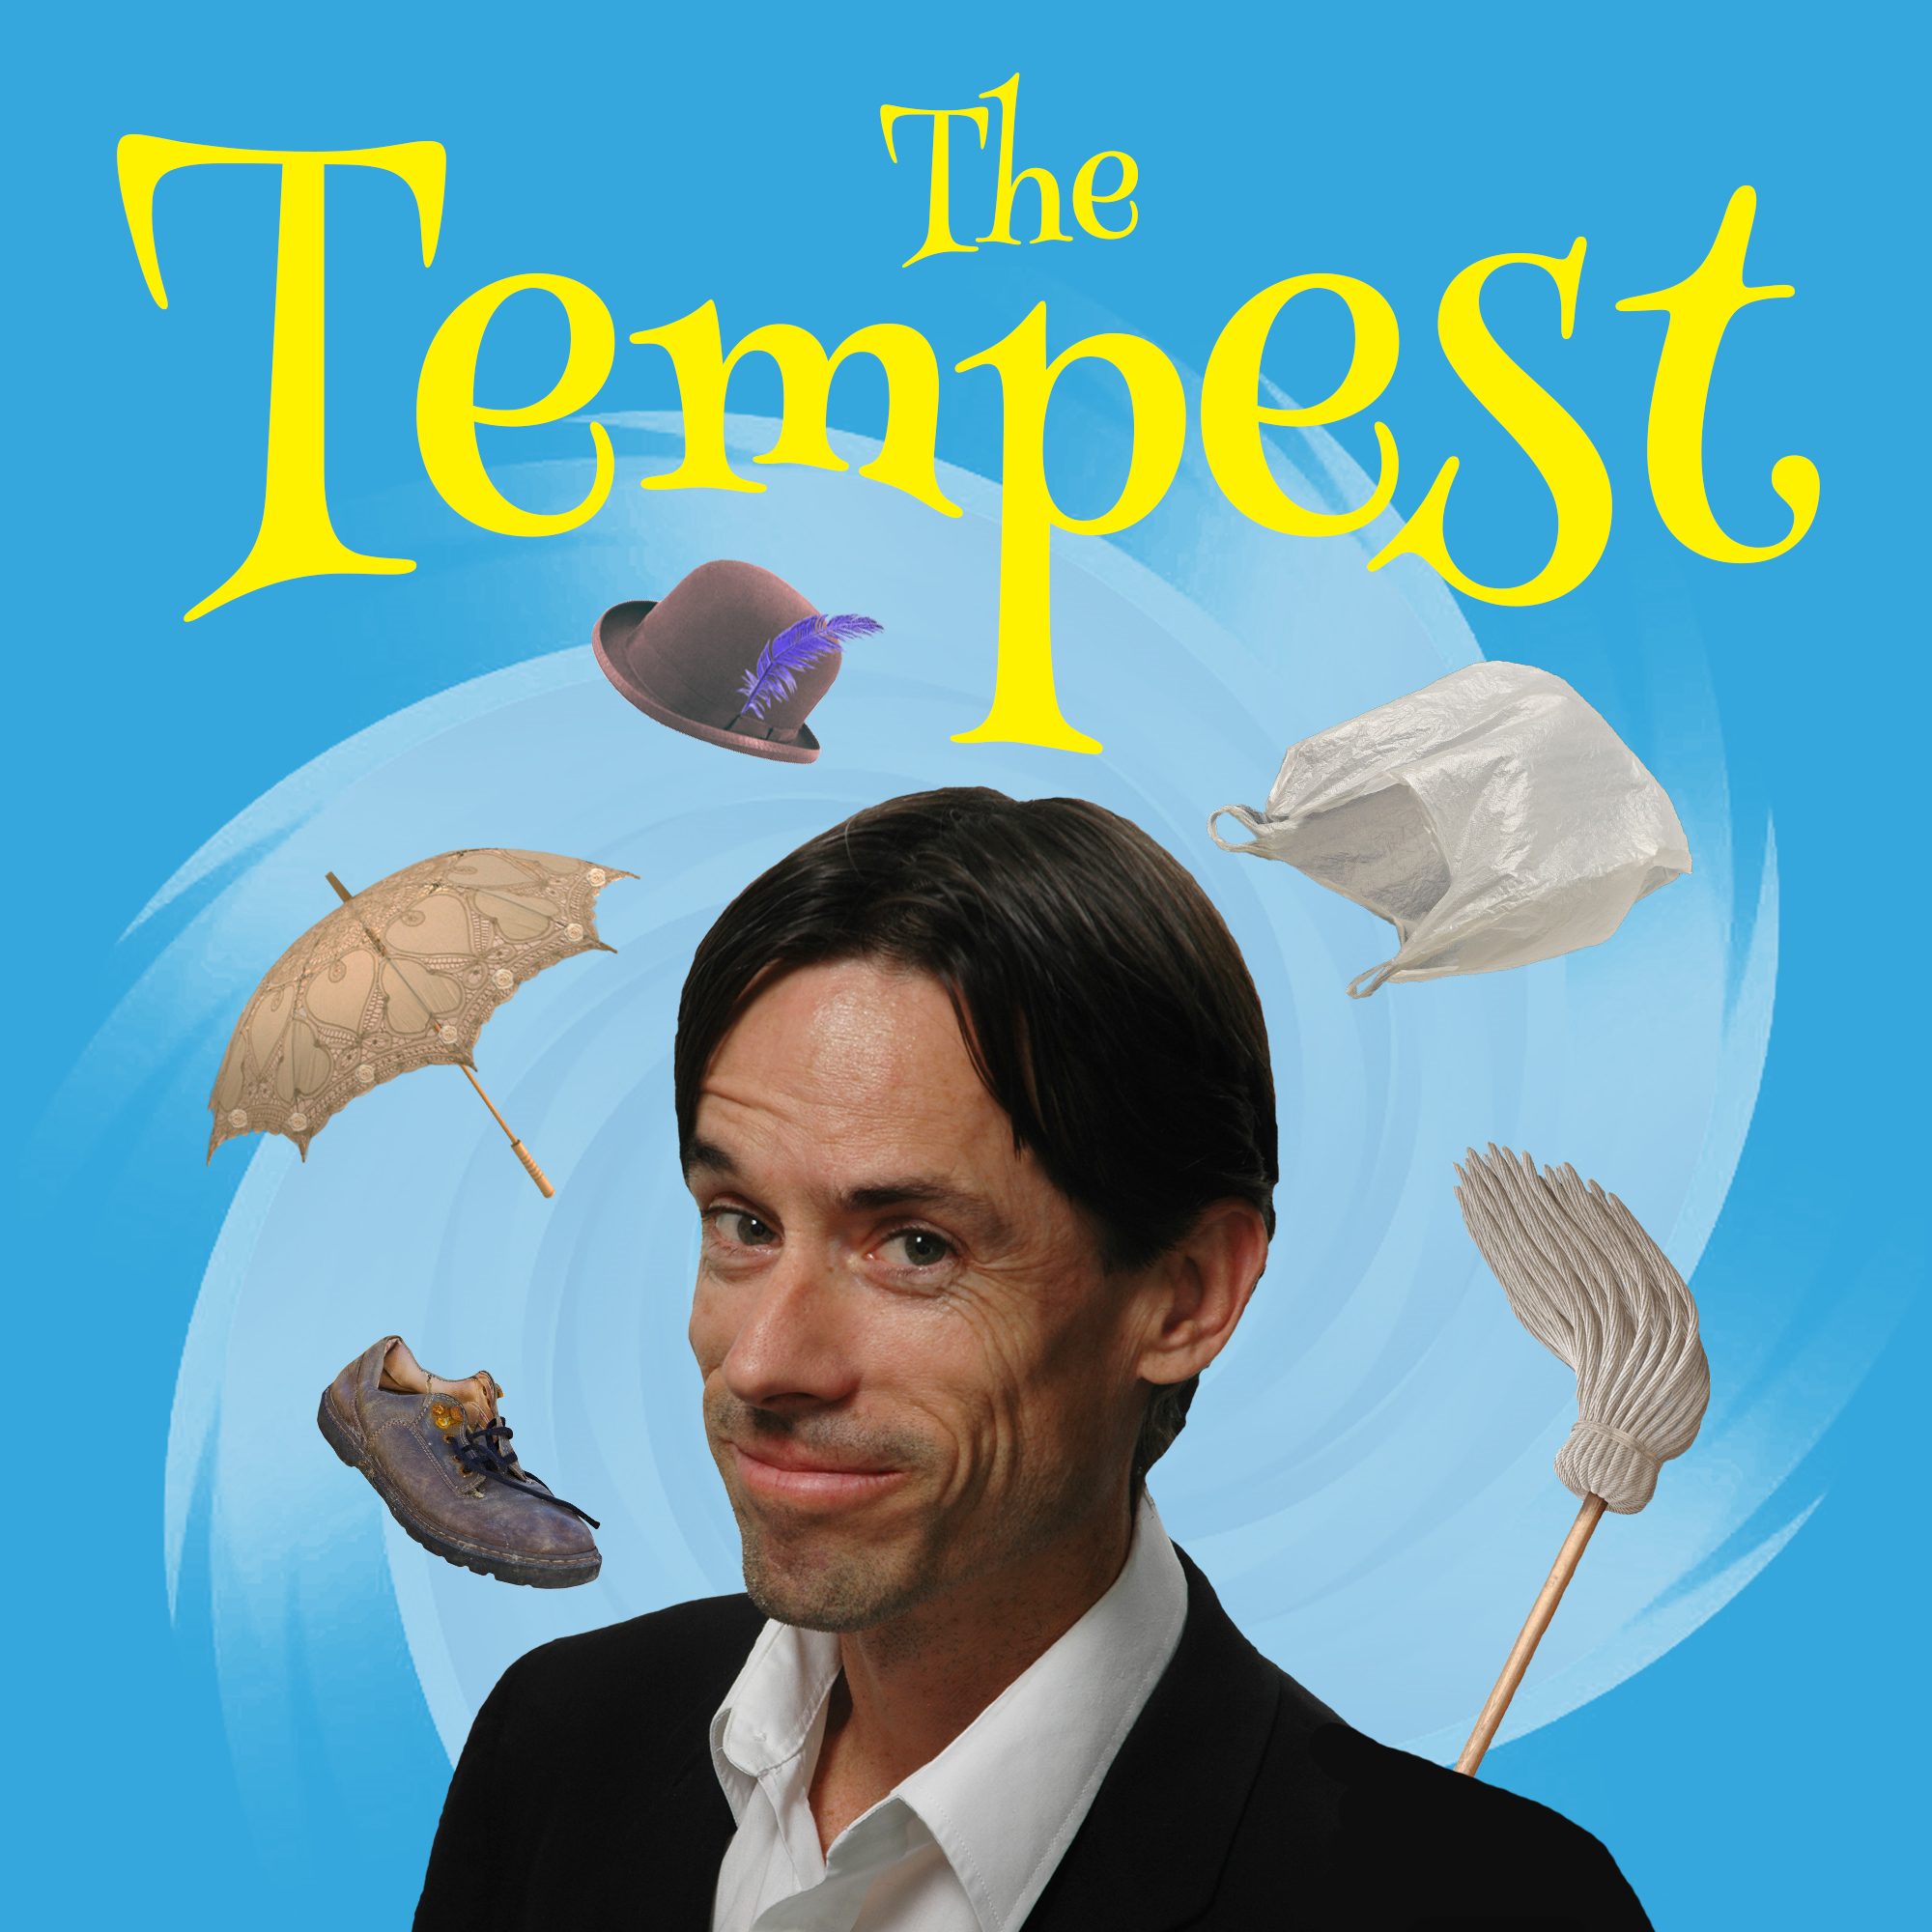 The Tempest man with floating objects